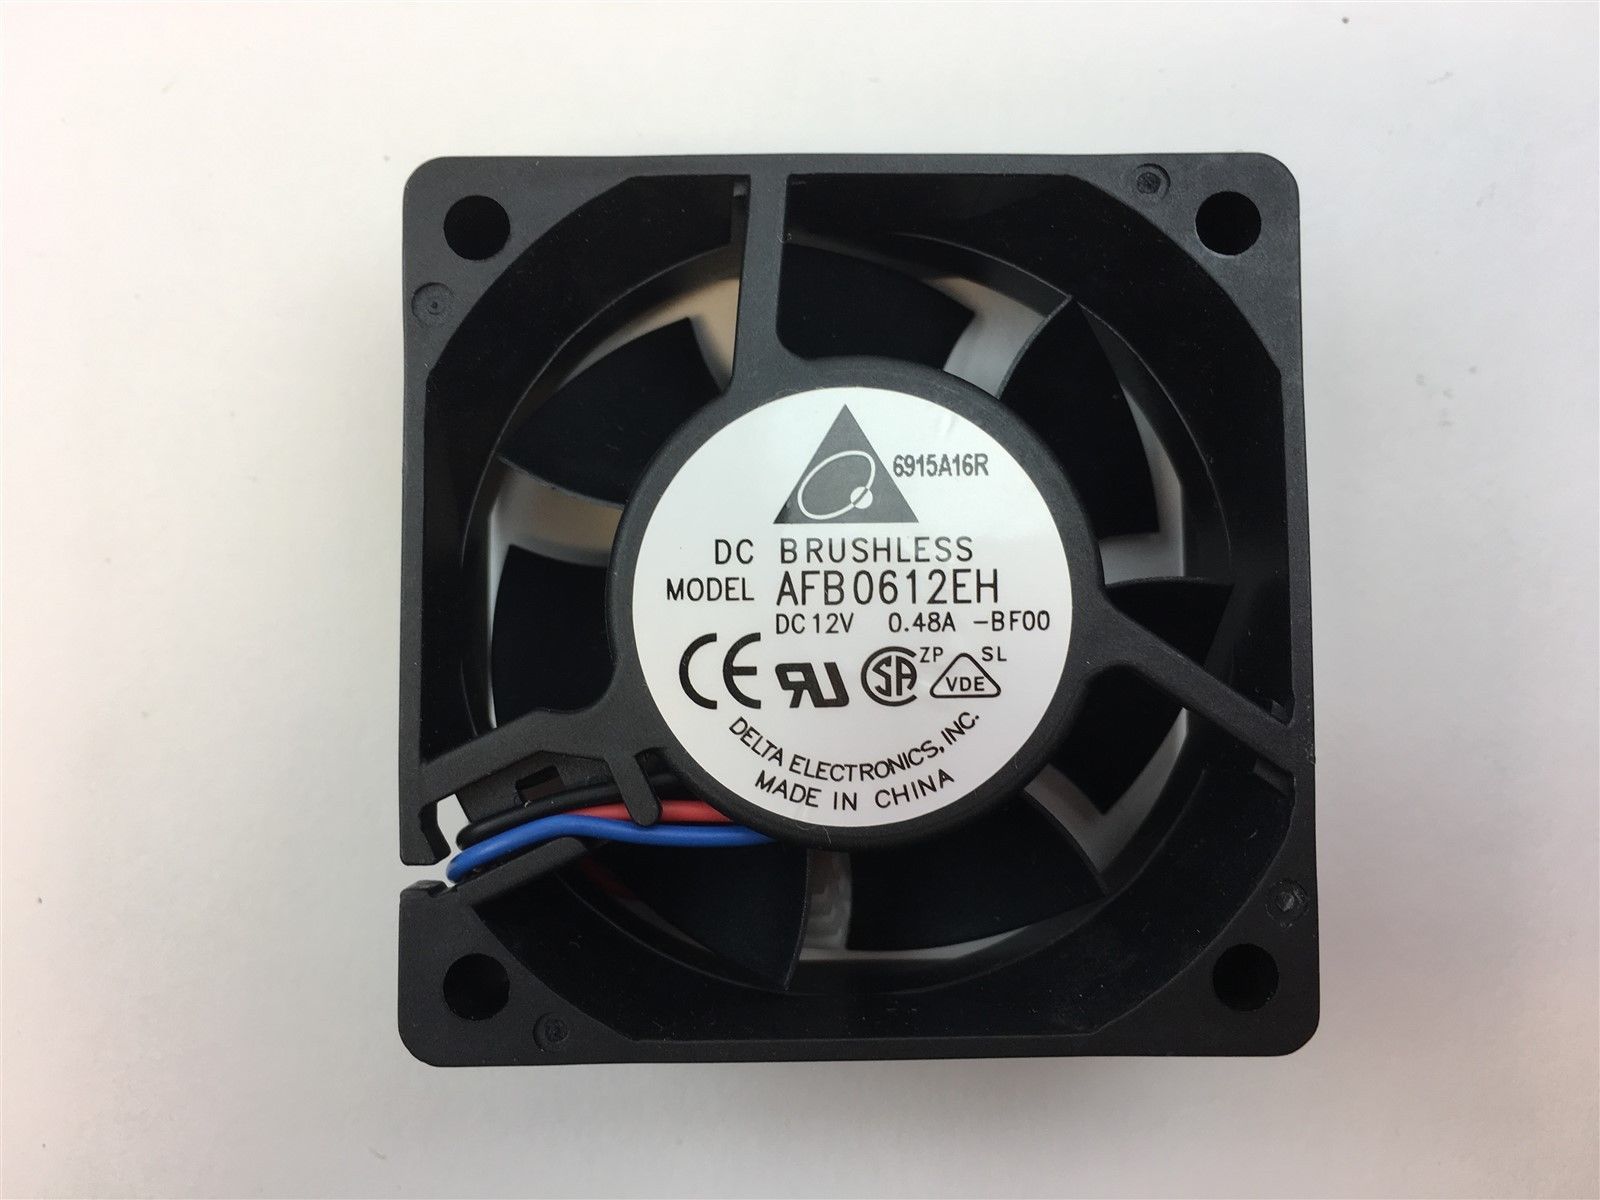 Genuine Inspiron DC Brushless AFB0612EH 12V Cooling Fan H6803 0H6803